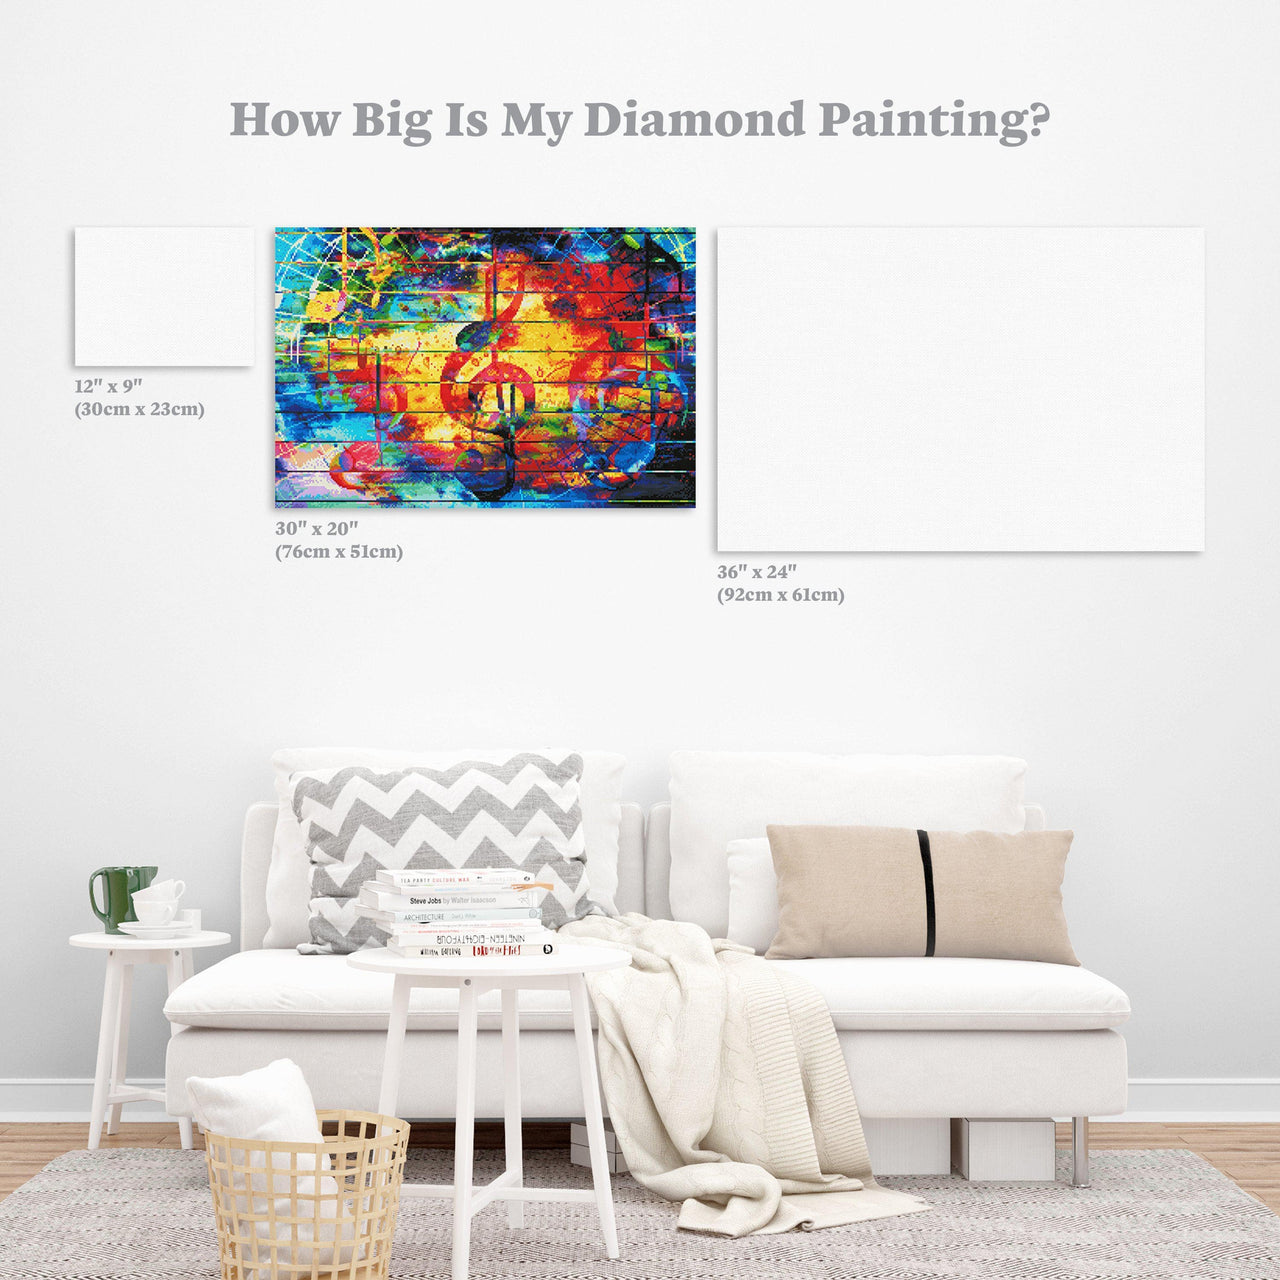 Diamond Painting Abstract Music Notes 20" x 30″ (51cm x 76cm) / Round with 46 Colors including 2 ABs / 48,601